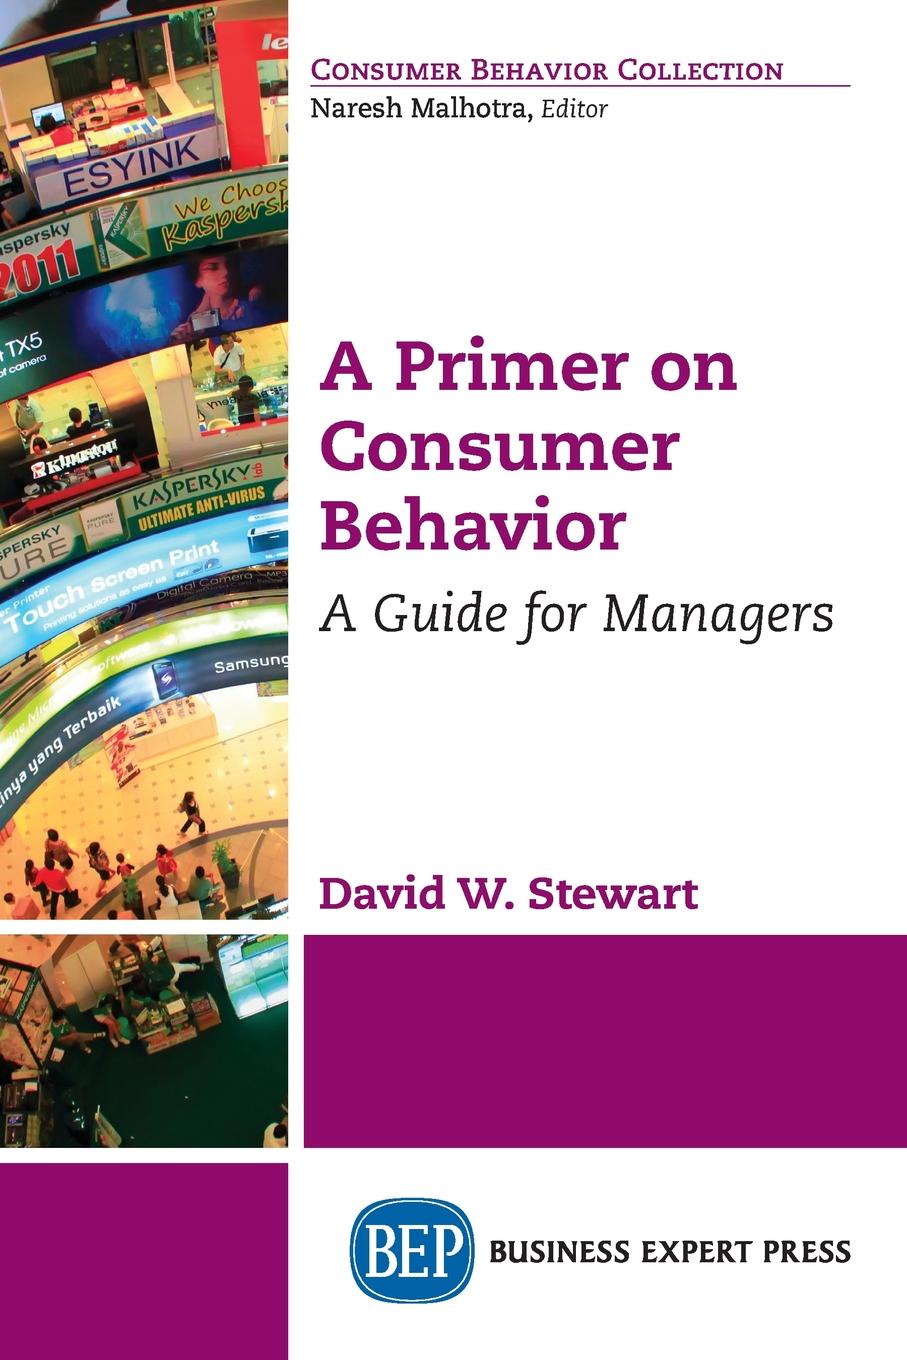 A Primer on Consumer Behavior. A Guide for Managers